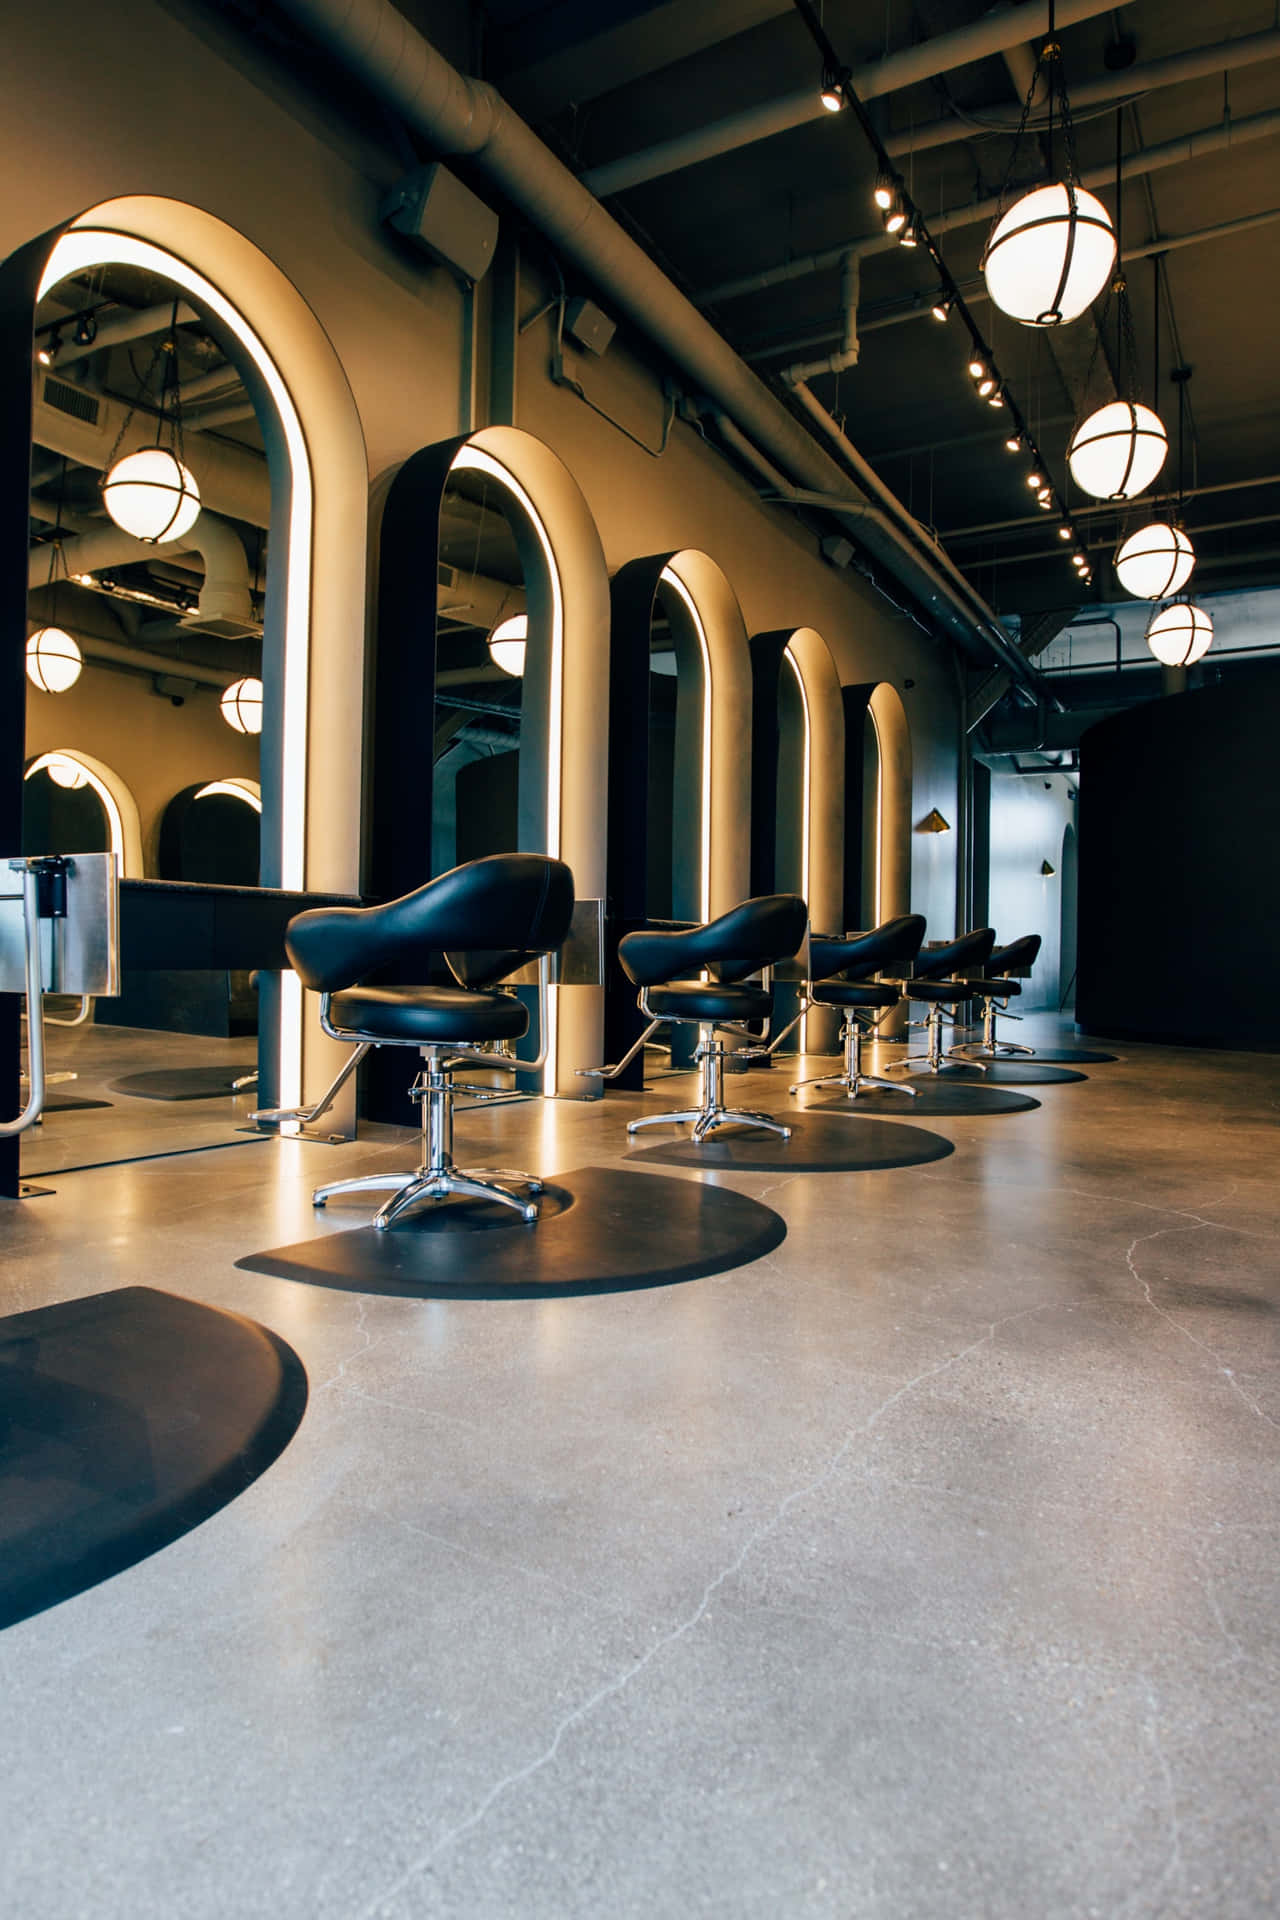 Get The Look Of Your Dreams At Our Hair Salon!